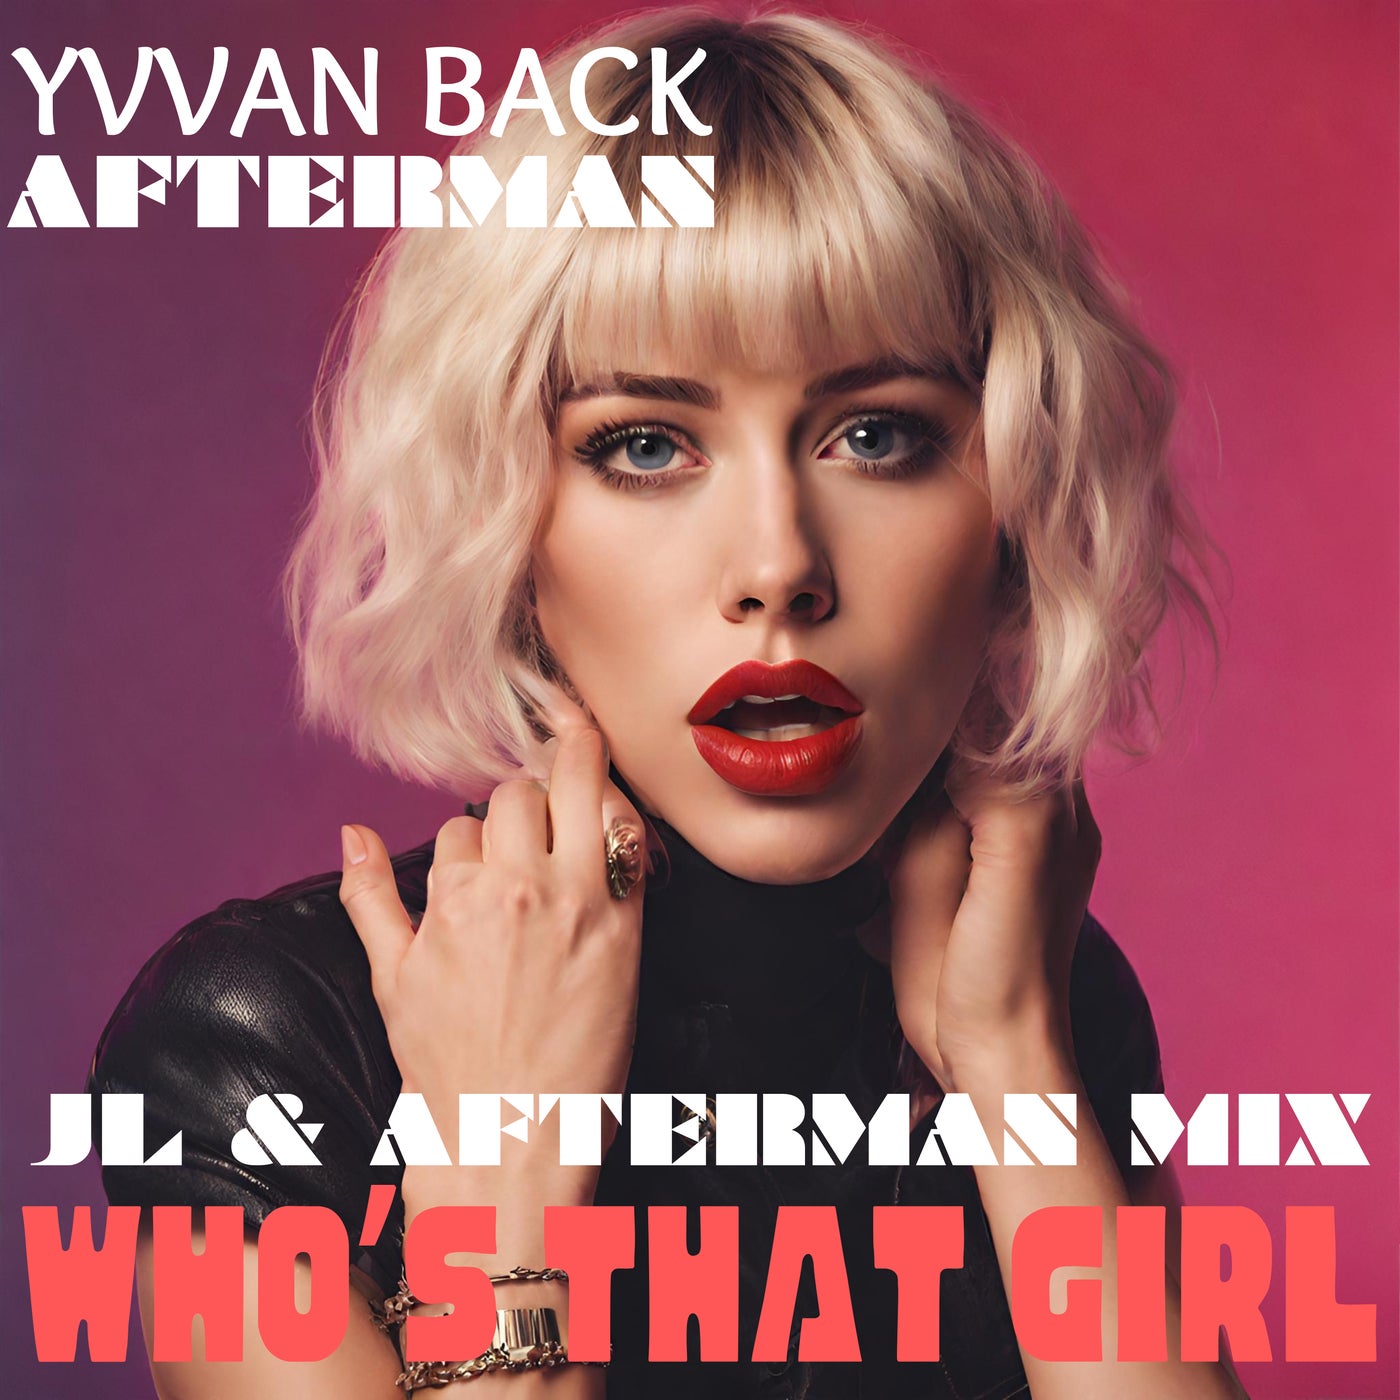 image cover: Afterman, Yvvan Back - Who's That Girl (JL & Afterman Mix) on MilanoNights